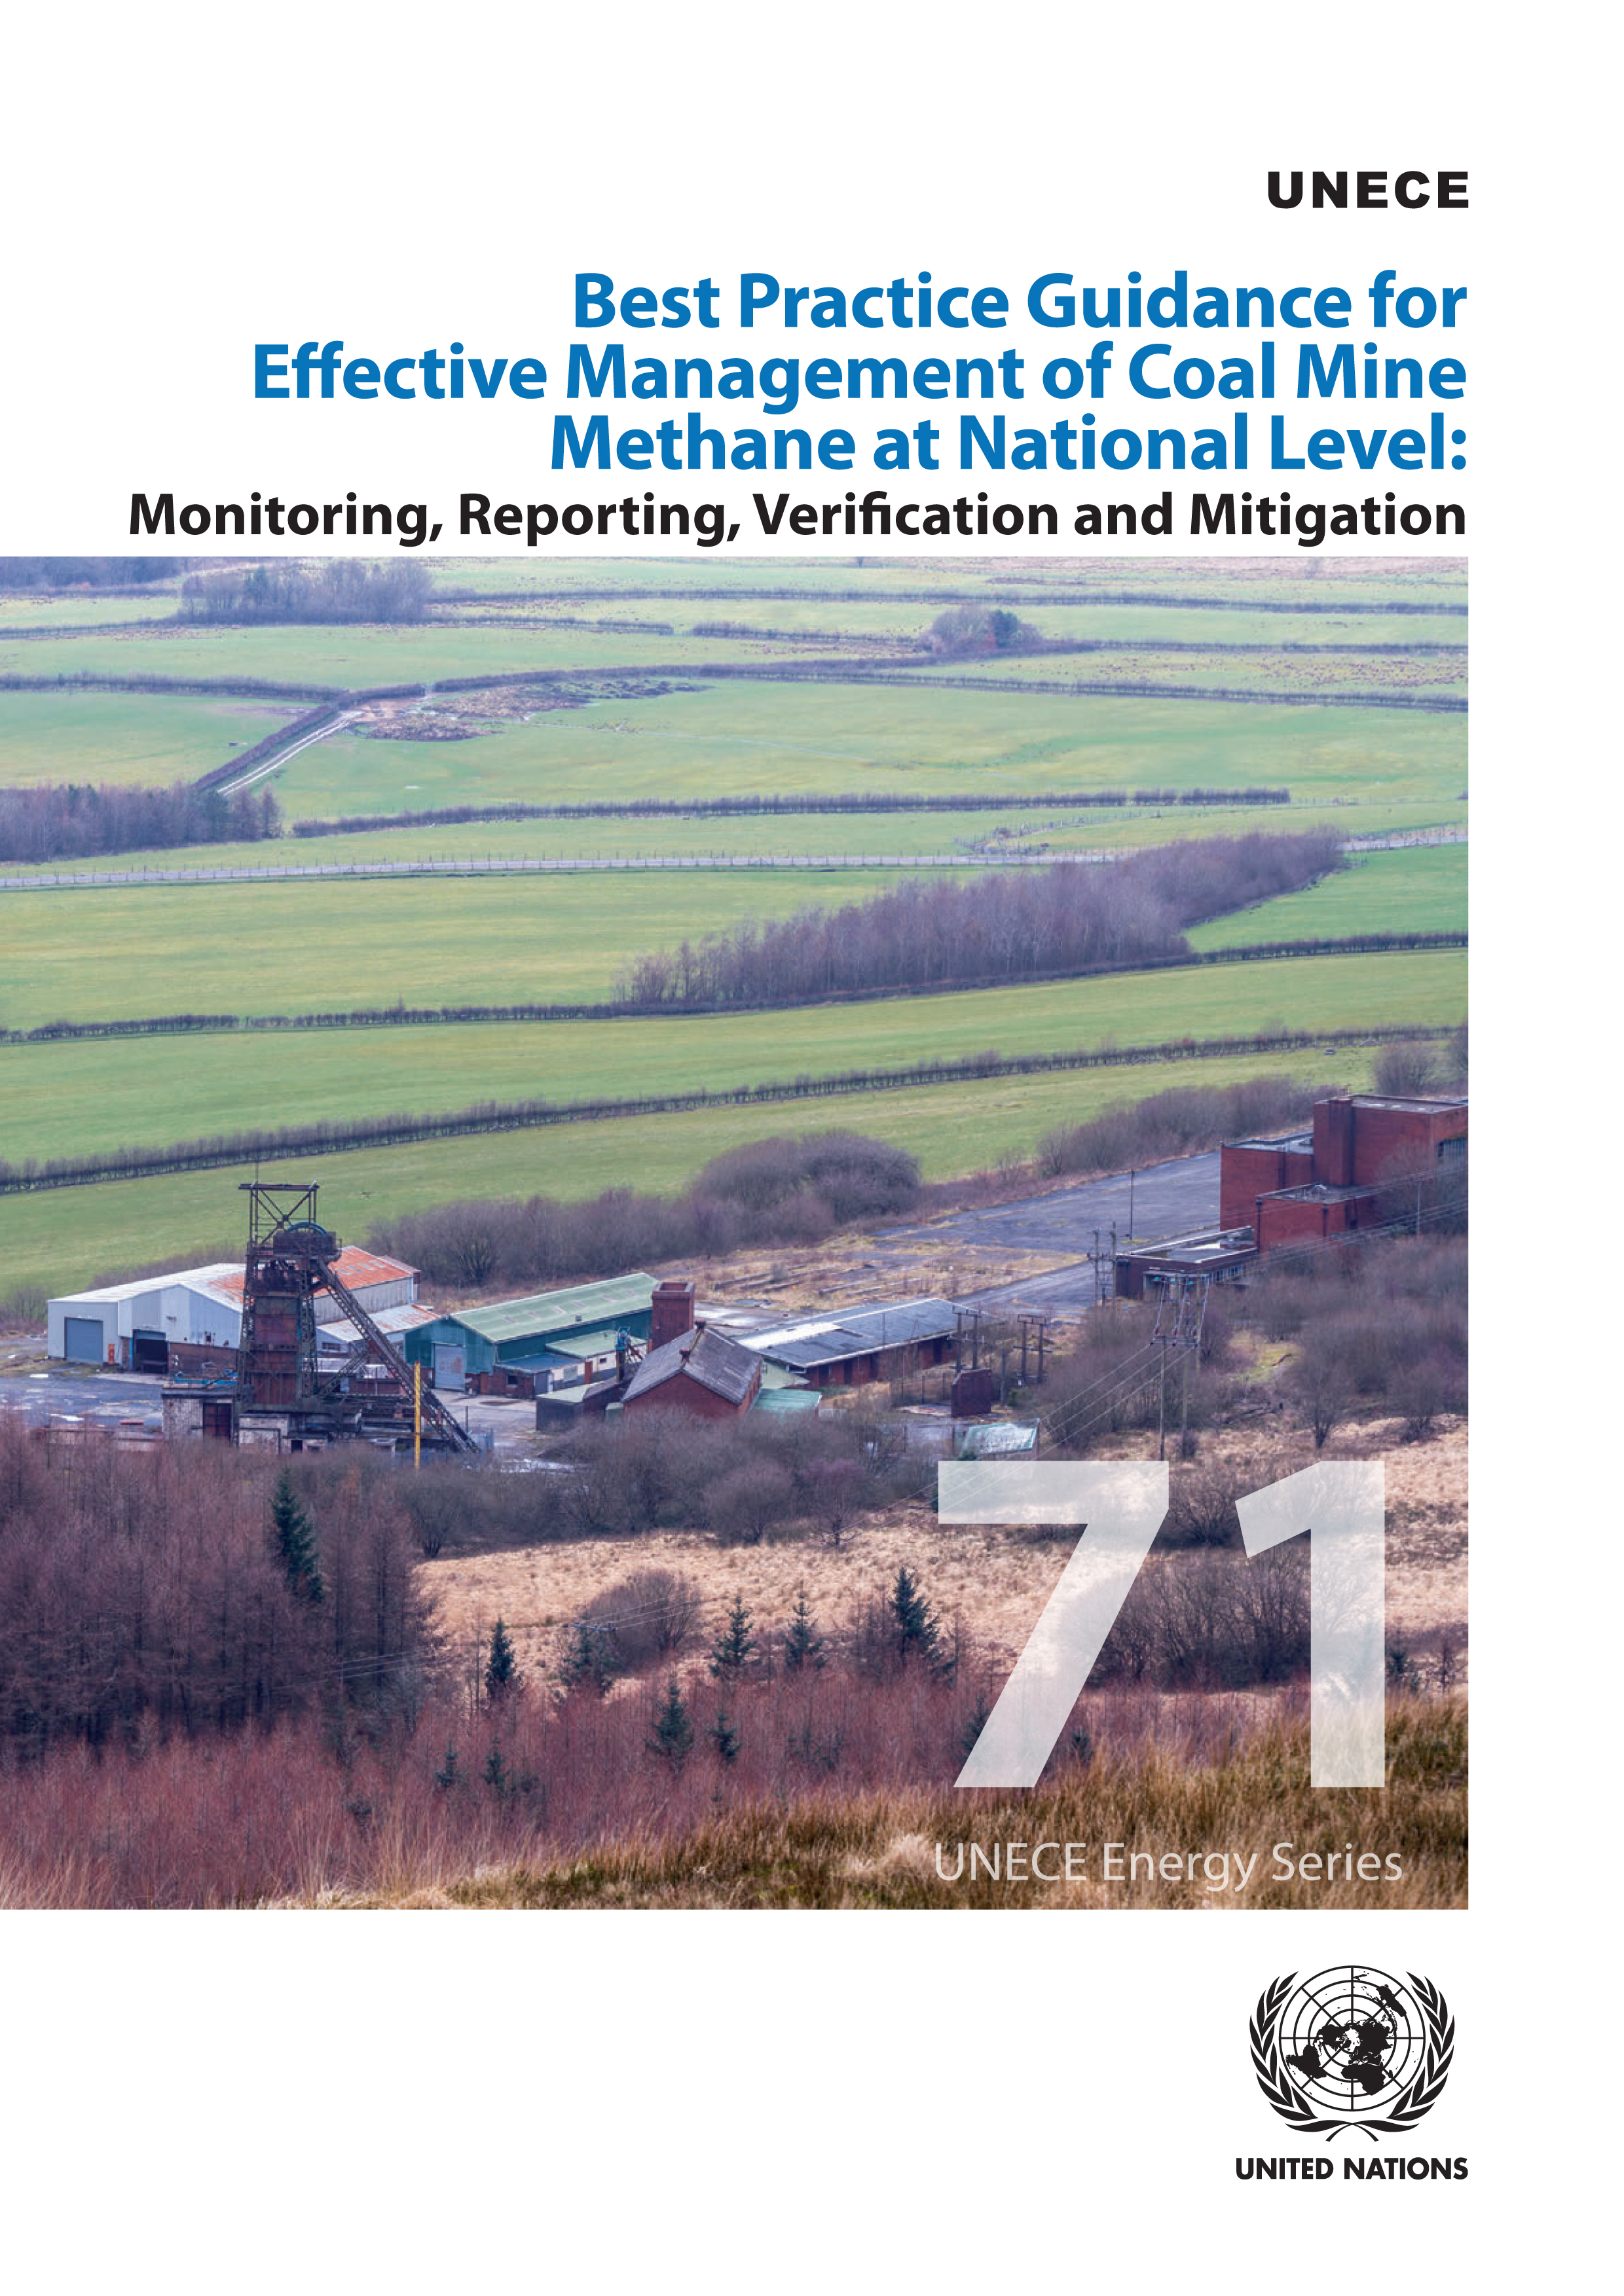 image of Best Practice Guidance for Effective Management of Coal Mine Methane at National Level